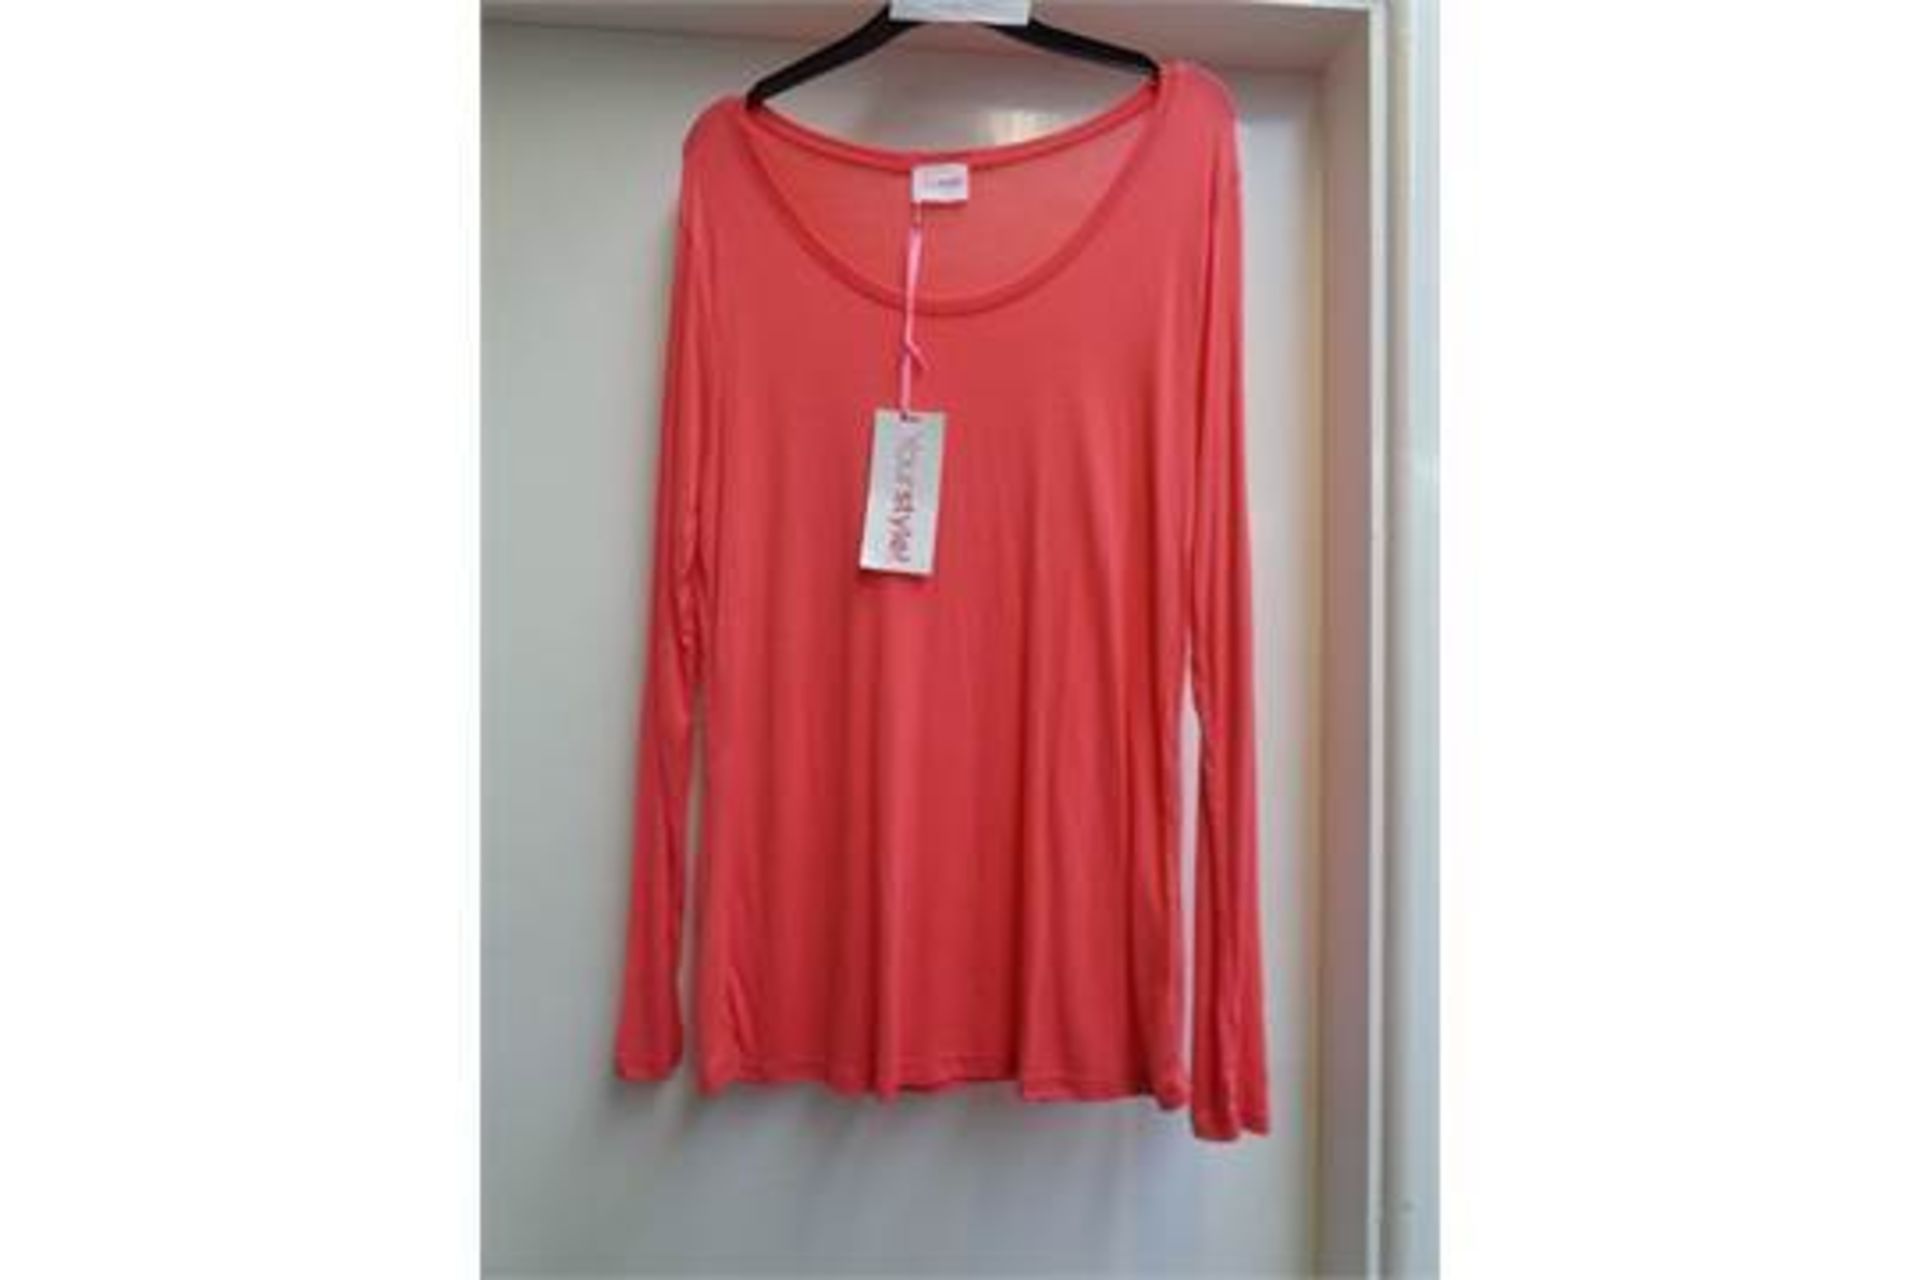 4 X LADIES RED TOP (DELIVERY BAND A)